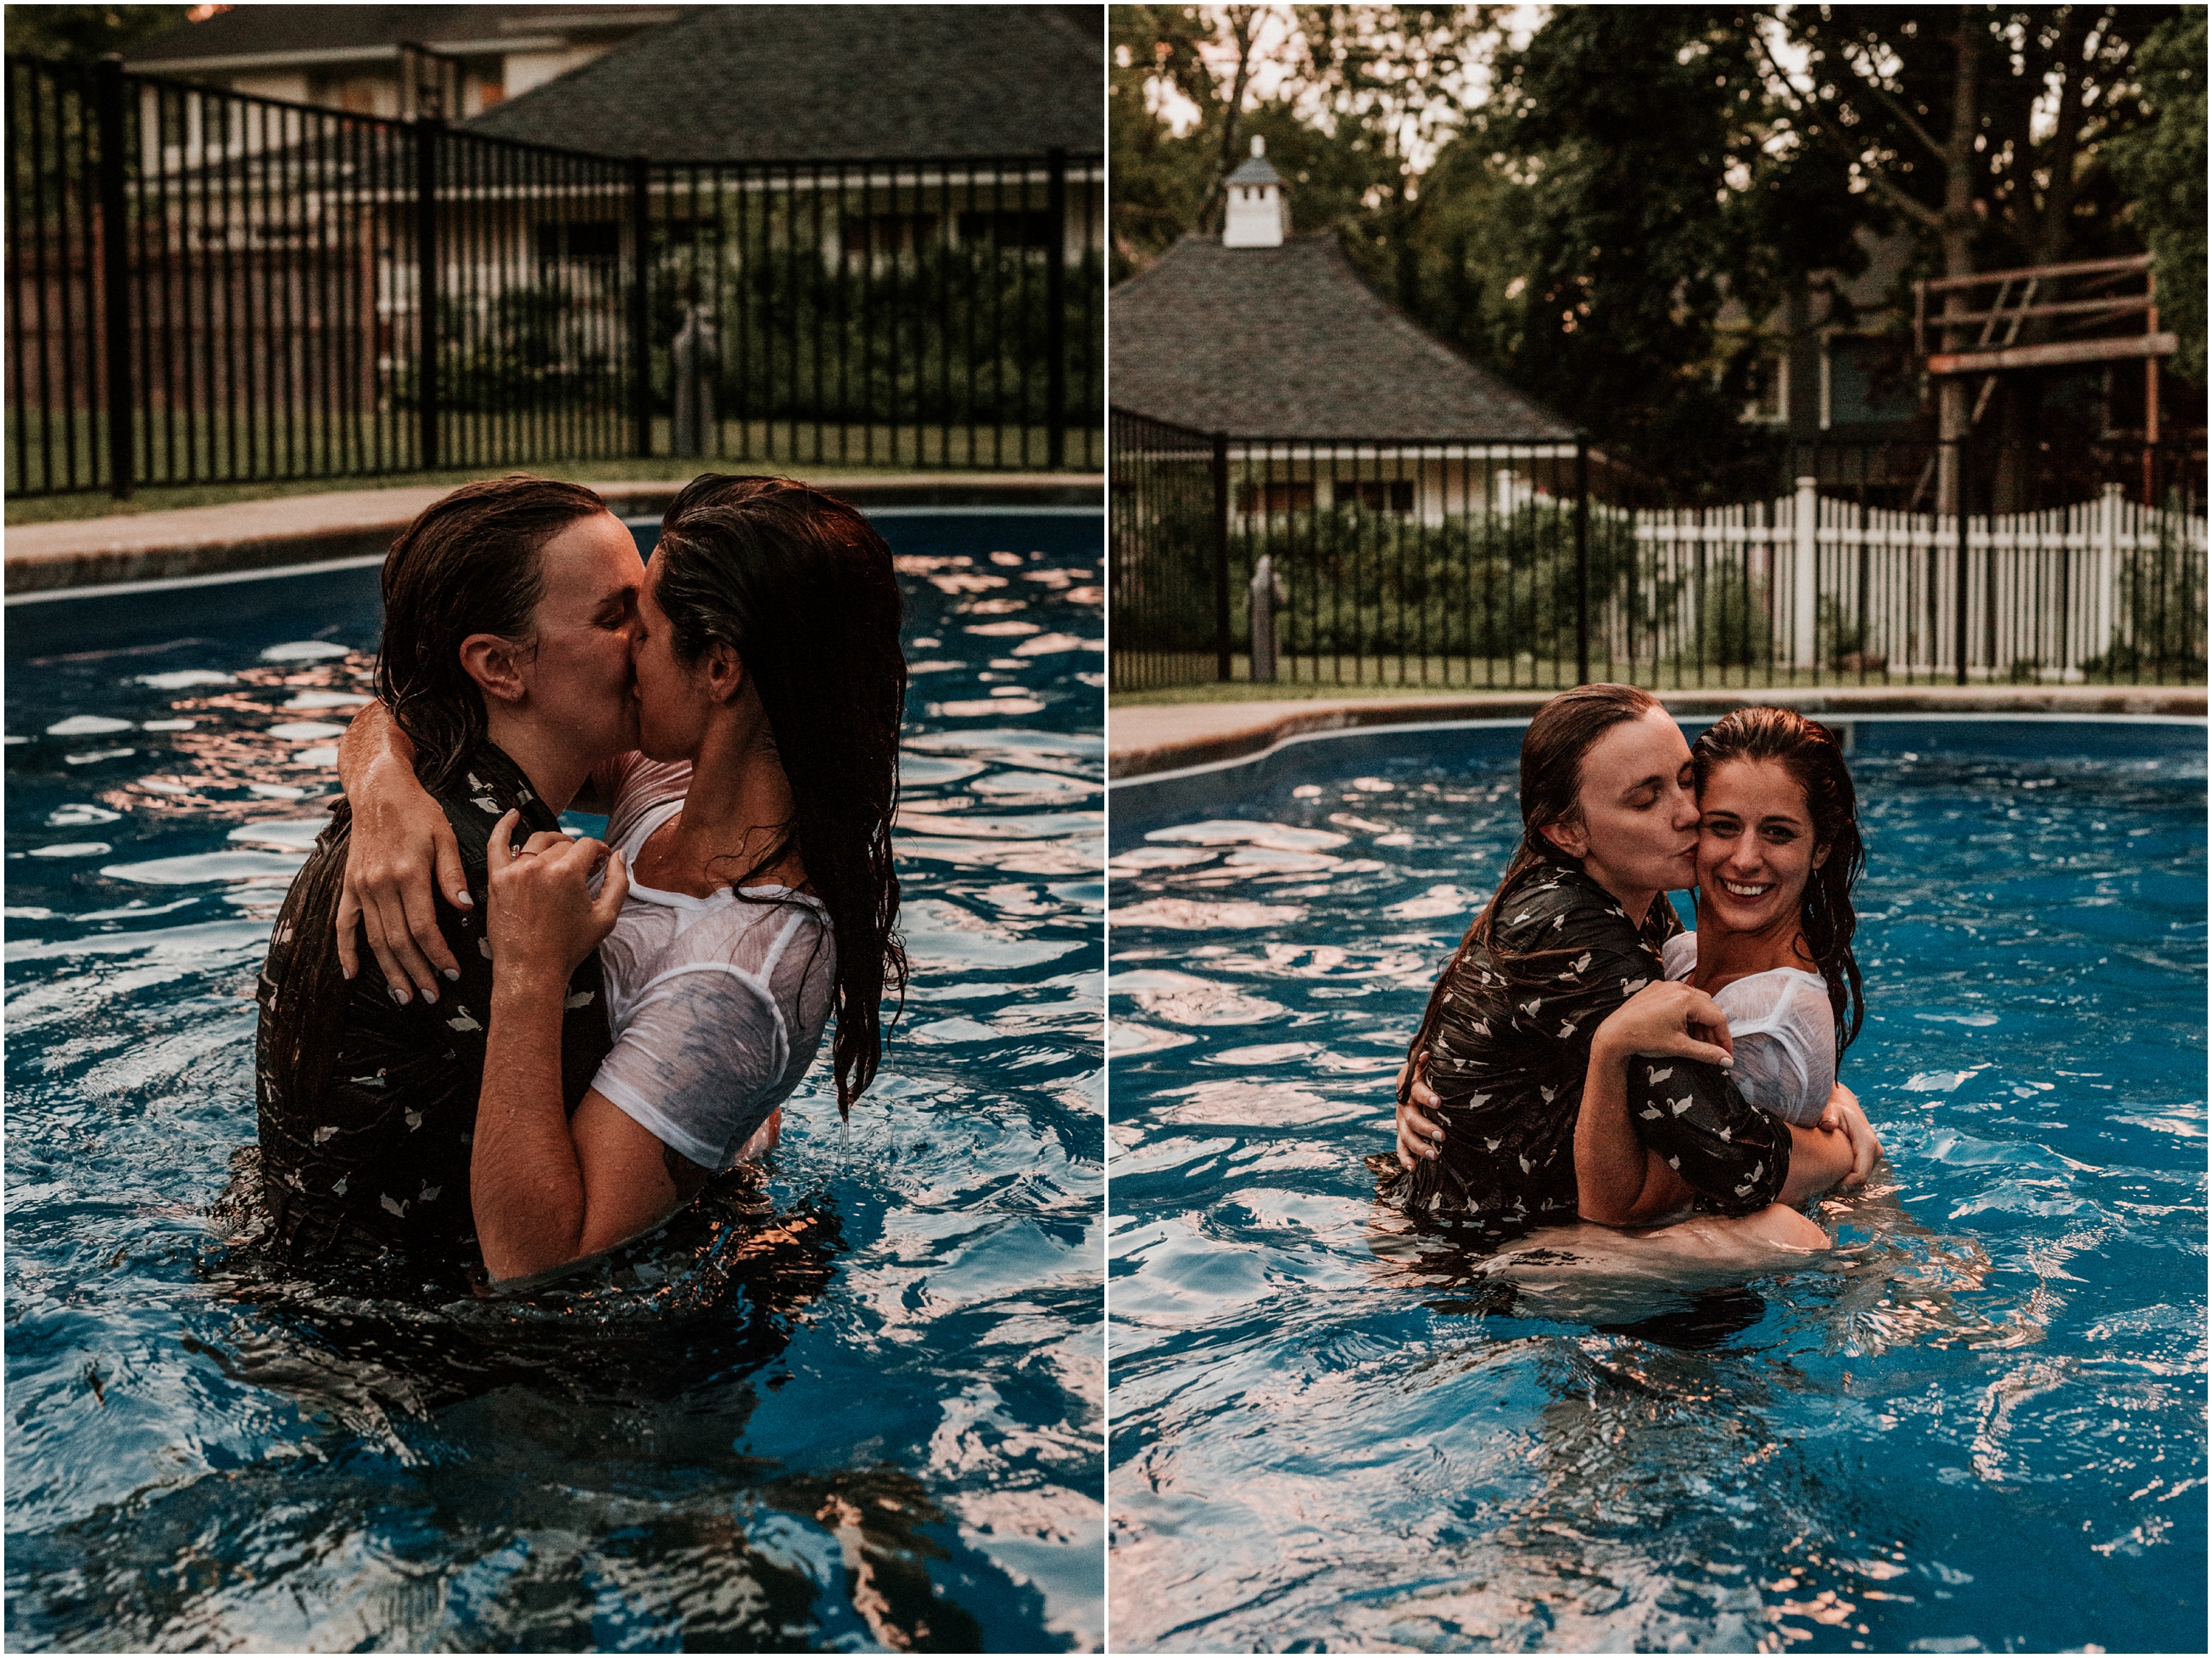 Montclair NJ Dog In Home Garden Pool Champagne Fight Engagement Session New Jersey Wedding Photographer